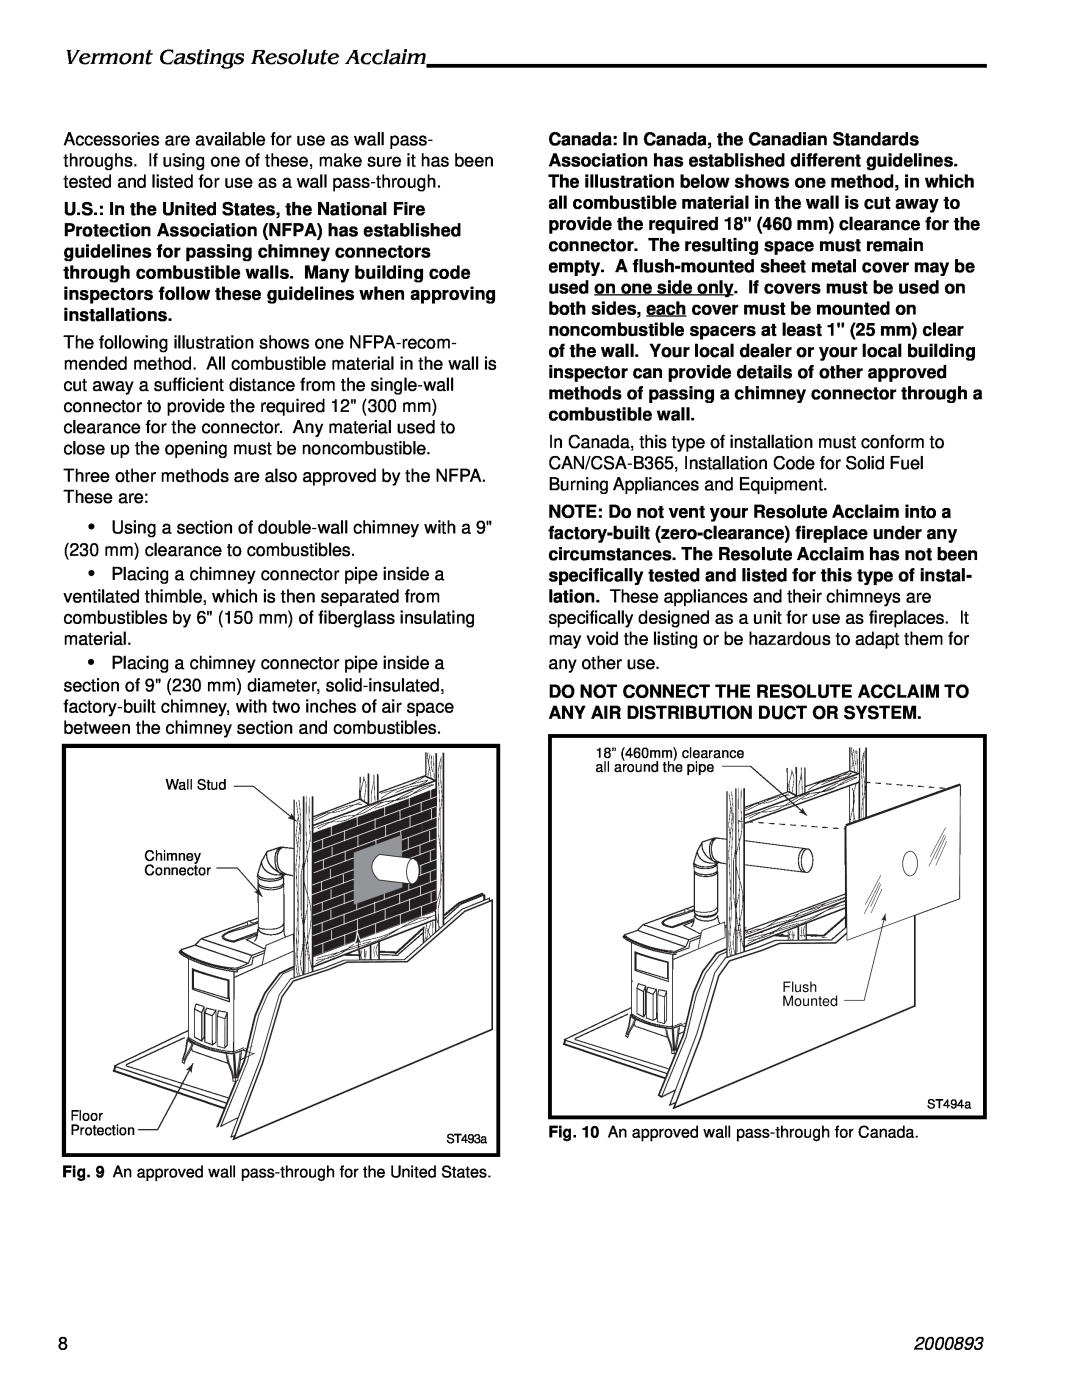 Majestic Appliances 2490 installation instructions Vermont Castings Resolute Acclaim, any other use, 2000893 